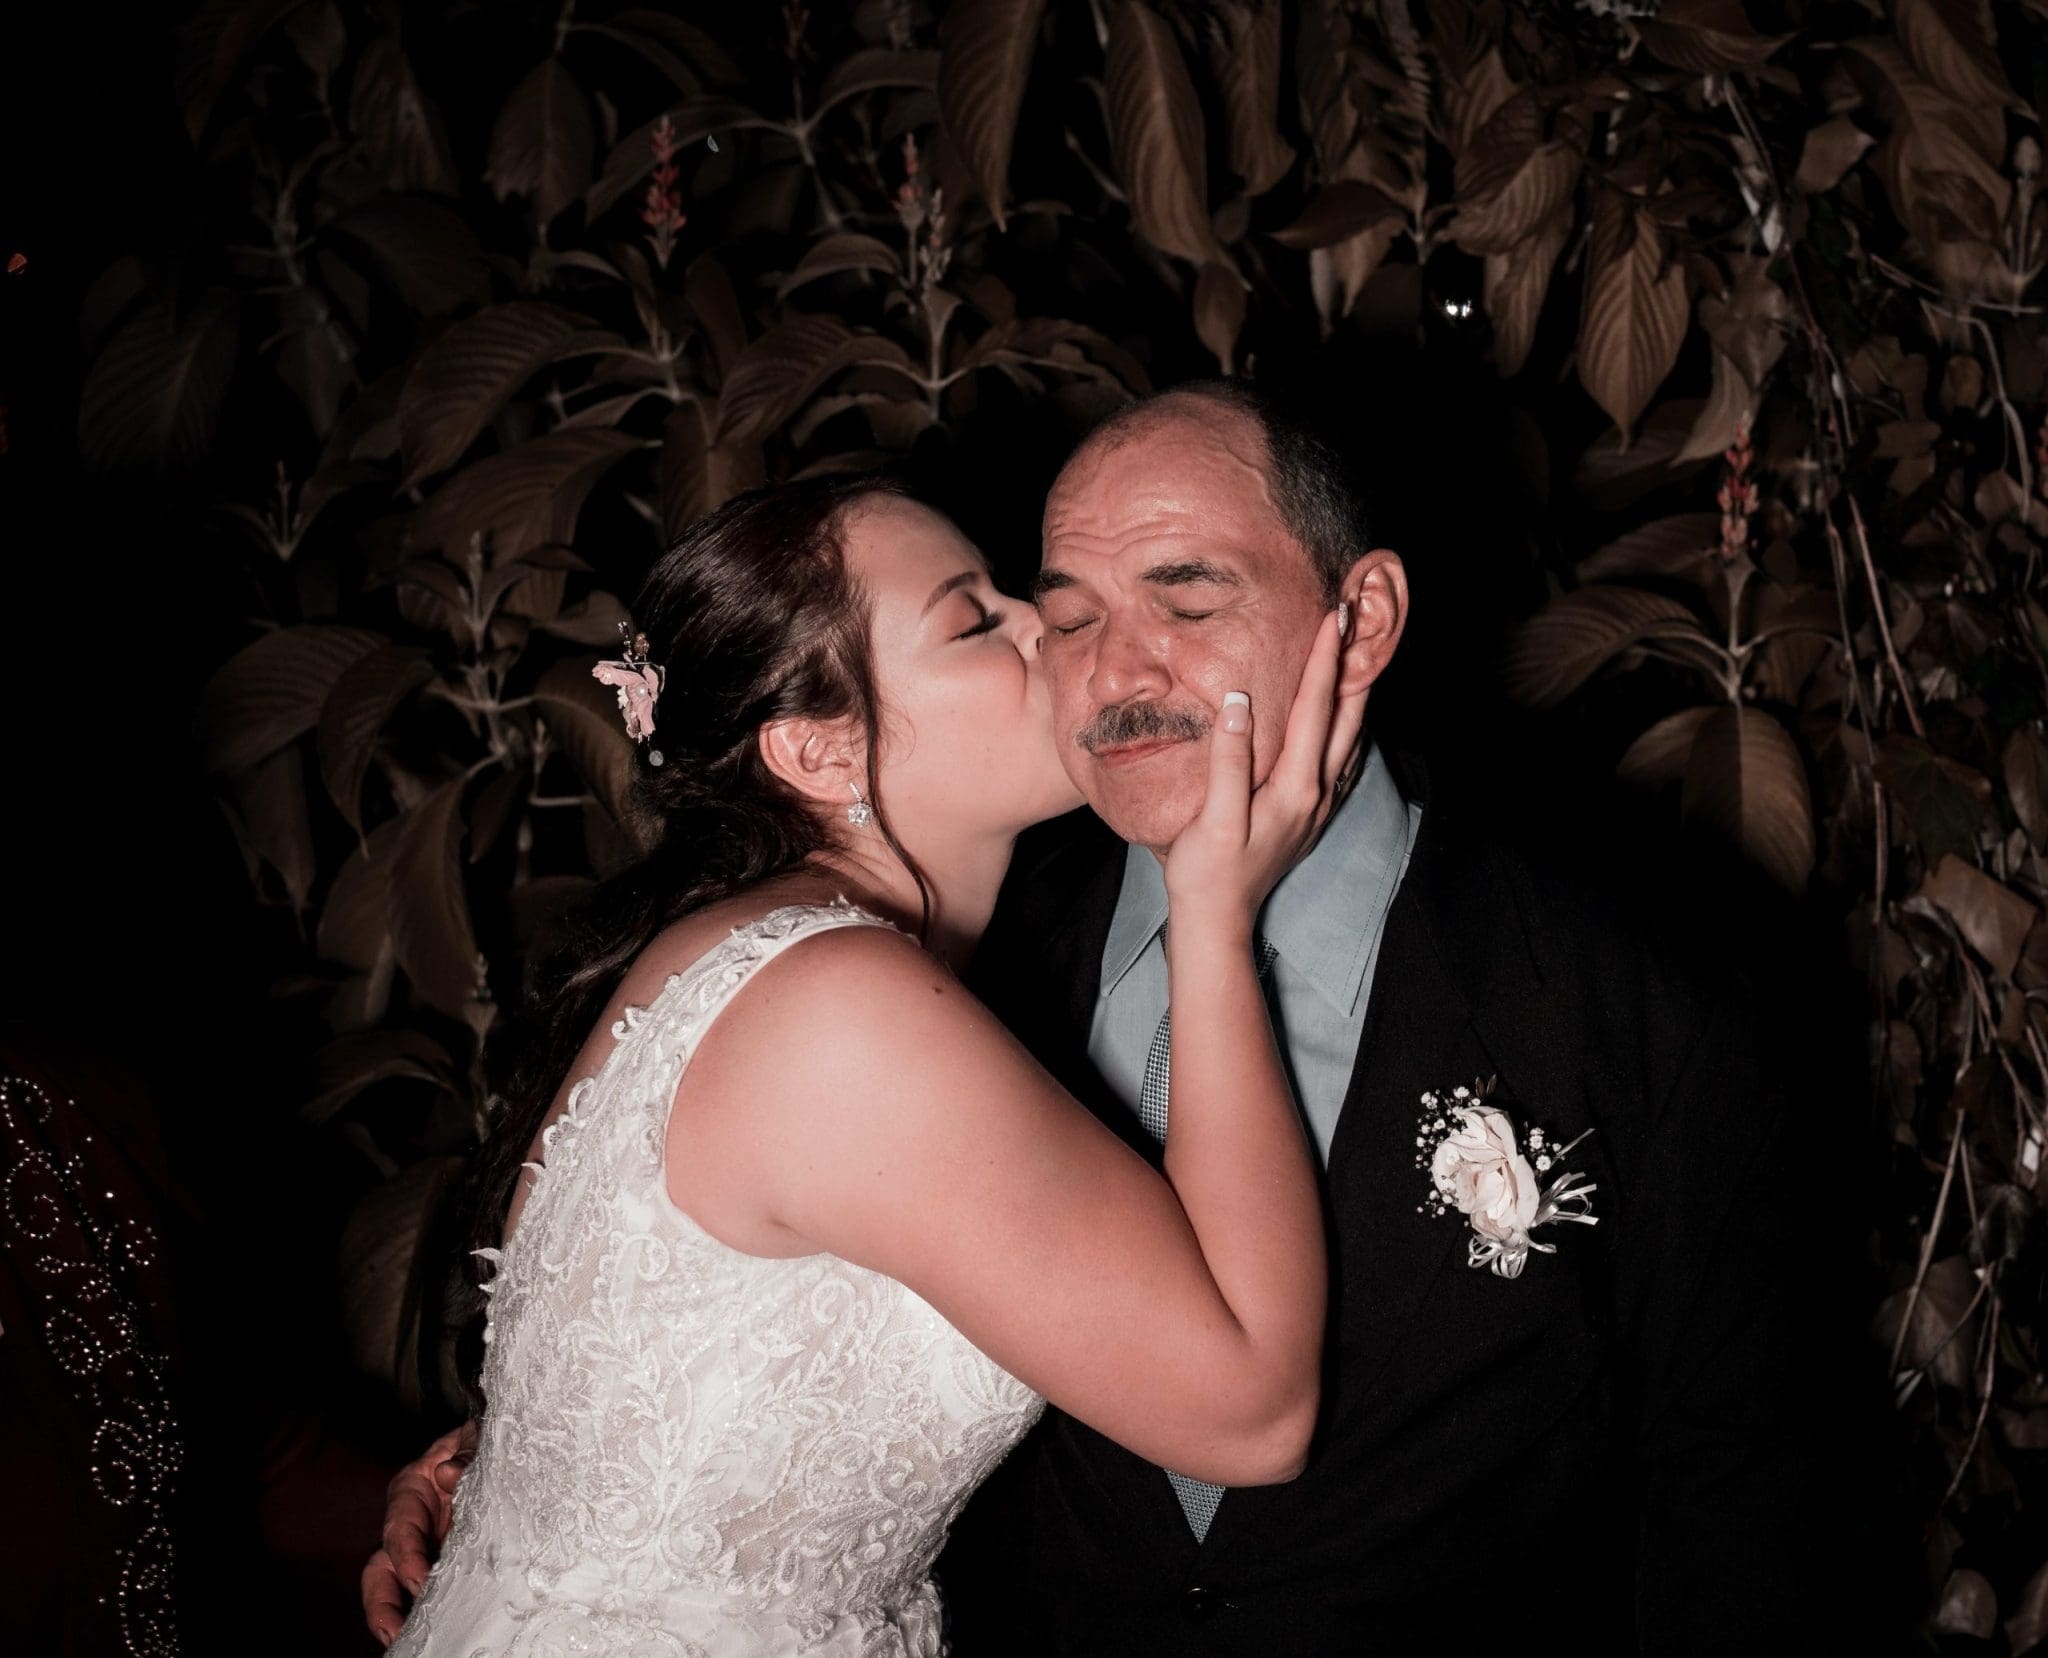 Father and daughter wedding kiss